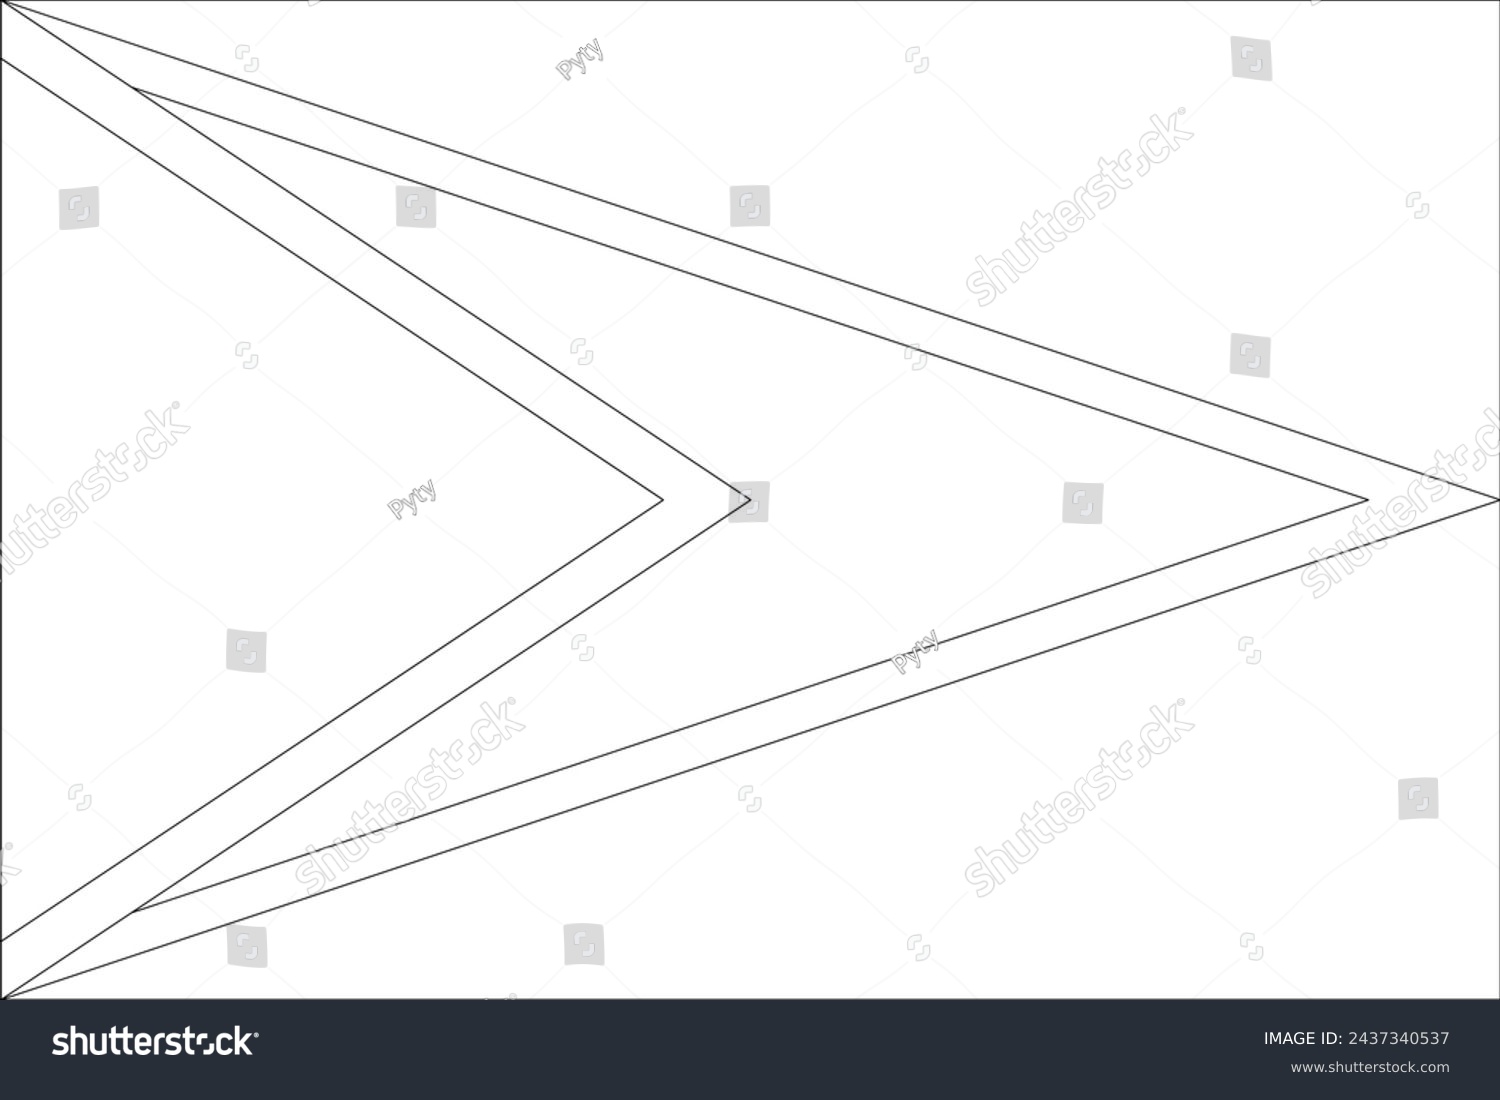 SVG of Guyana flag - thin black vector outline wireframe isolated on white background. Ready for colouring. svg